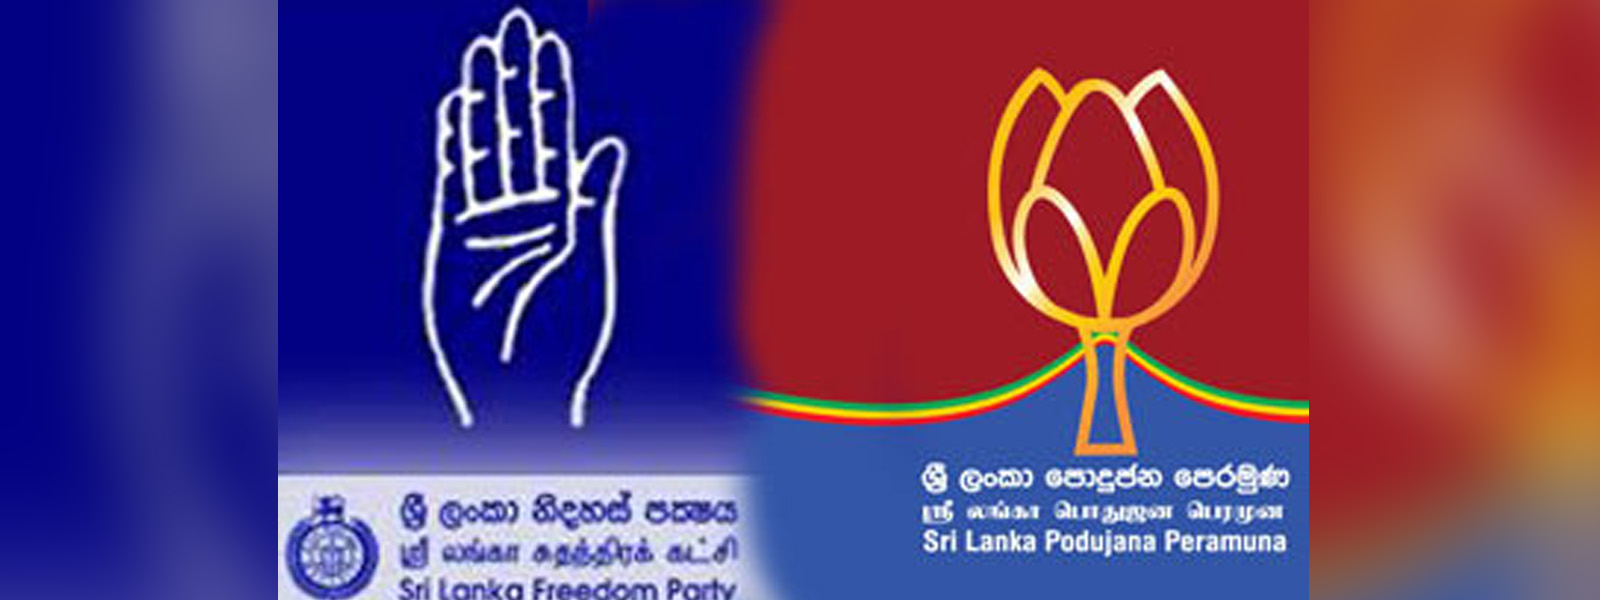 SLFP-SLPP alliance discussions to conclude by 09/3